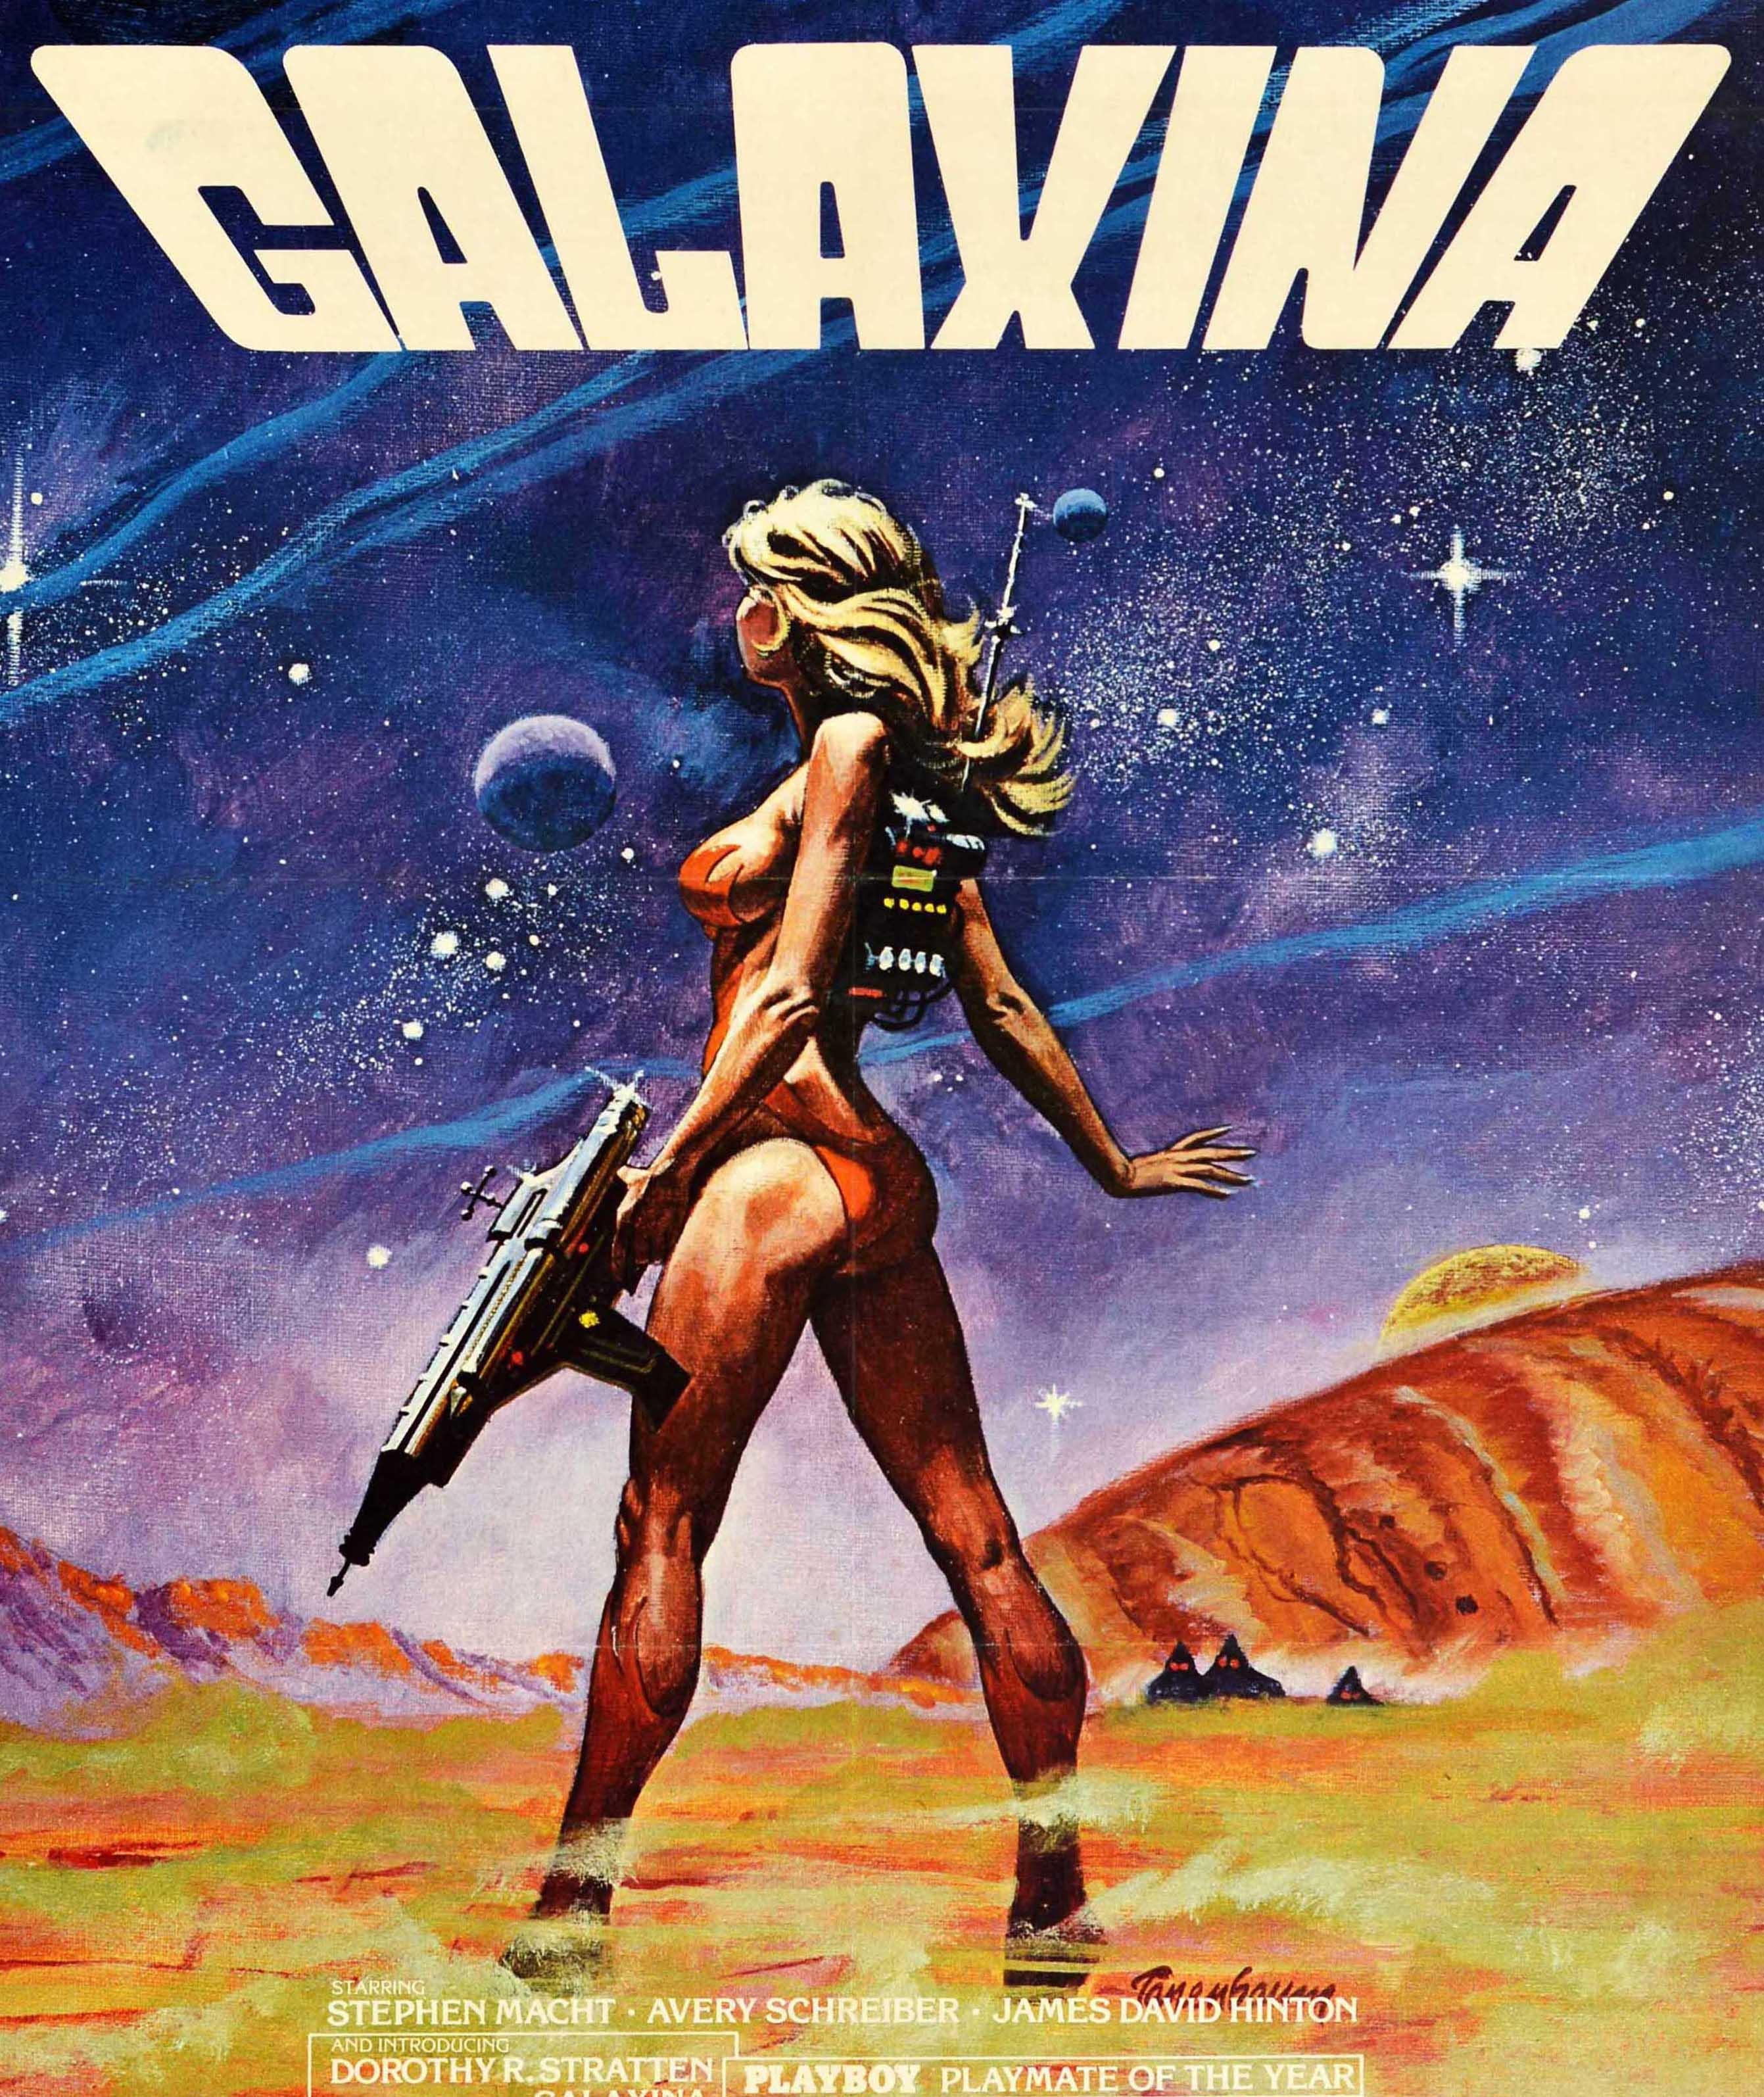 Original vintage movie poster for an American science fiction space comedy film Galaxina directed by William Sachs and starring Stephen Macht, Avery Schreiber, James David Hinton and introducing the 1980 Playboy Playmate of the Year Dorothy Stratten